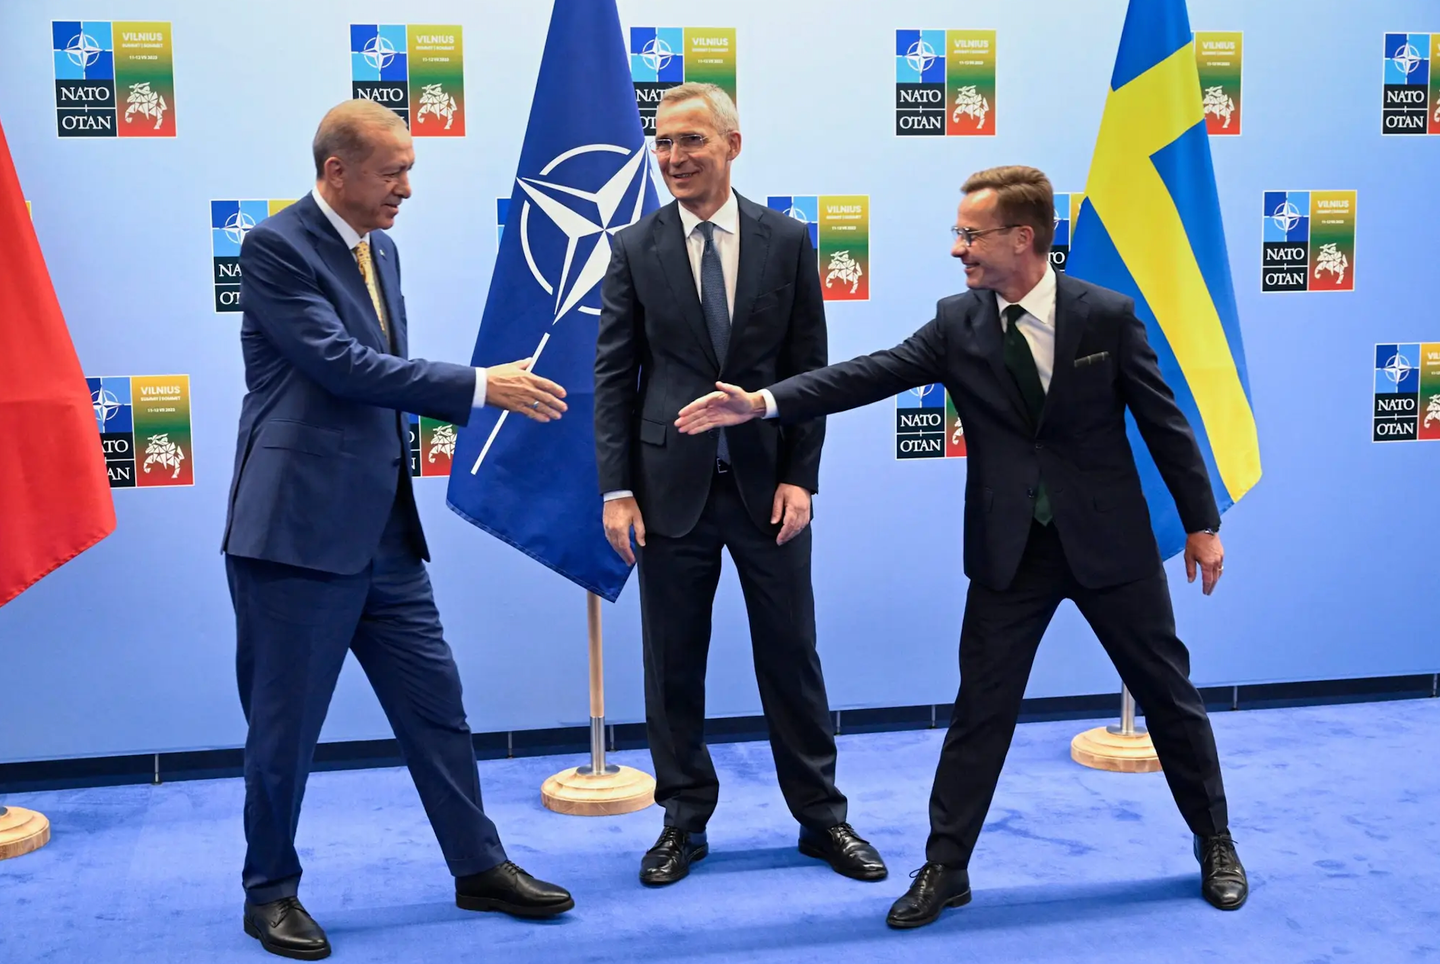 Turkish President Tayyip Erdogan (left) and Swedish Prime Minister Ulf Kristersson shake hands next to NATO Secretary-General Jens Stoltenberg before a meeting on the eve of a NATO summit, in Vilnius on July 10, 2023. <em>Photo by HENRIK MONTGOMERY/TT NEWS AGENCY/AFP via Getty Images<br></em>